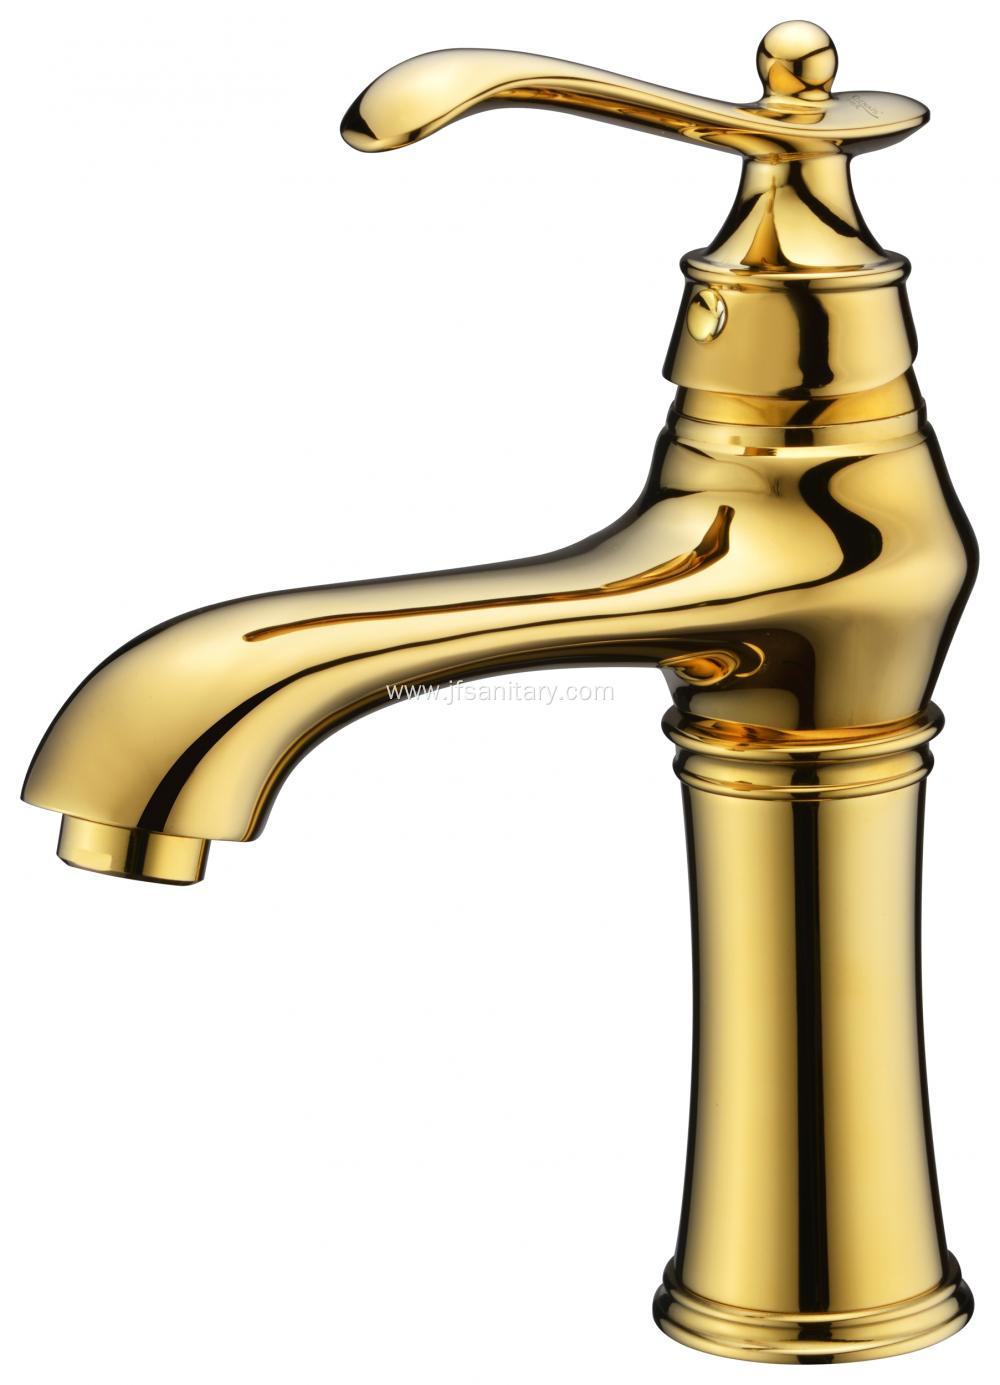 Gold Single Hole And Handle Vintage Basin Faucet